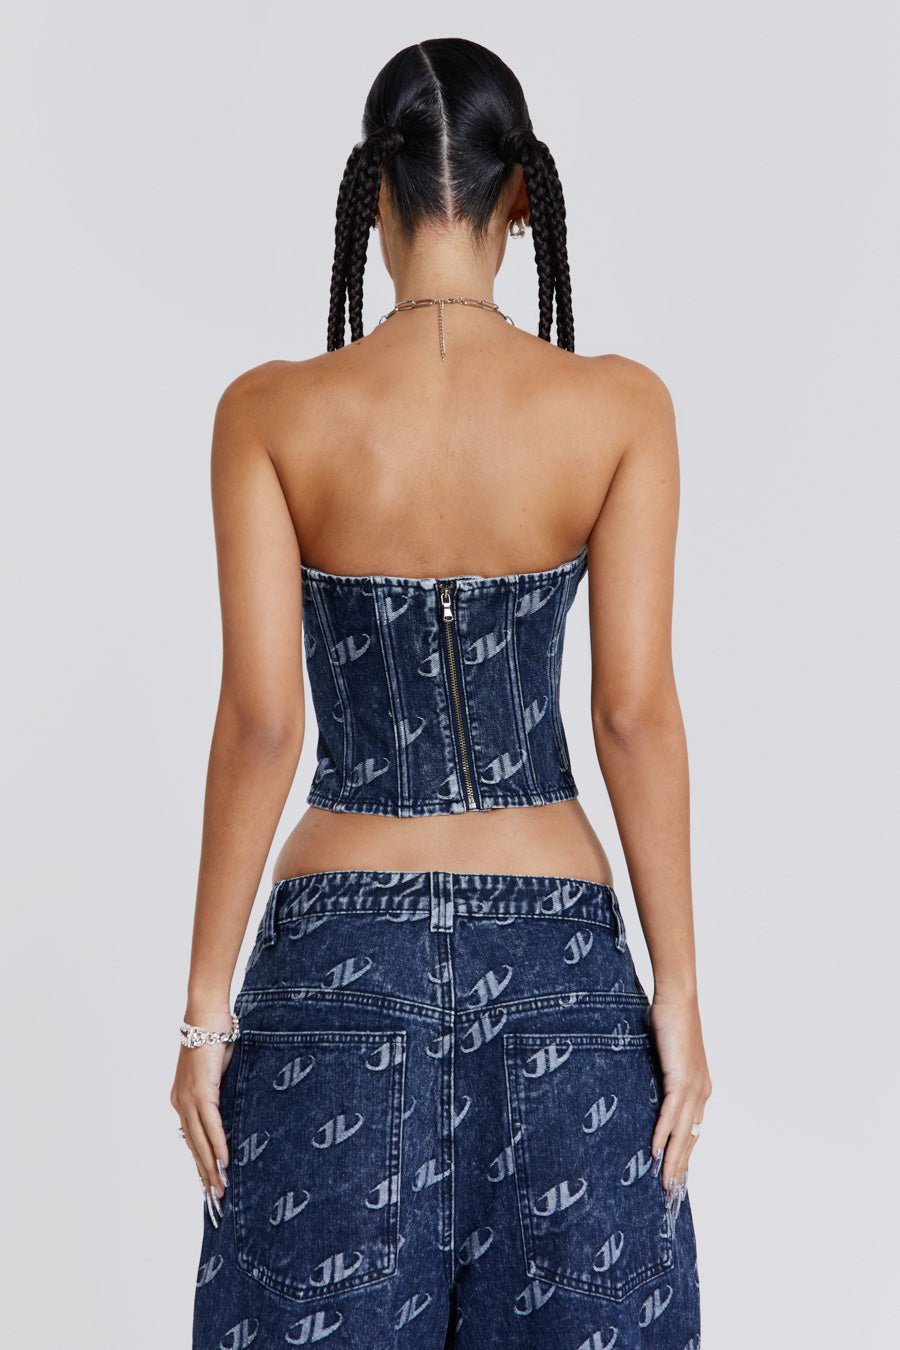 Blue Denim Strapless Corset Top With Buckle Detail | Jaded London